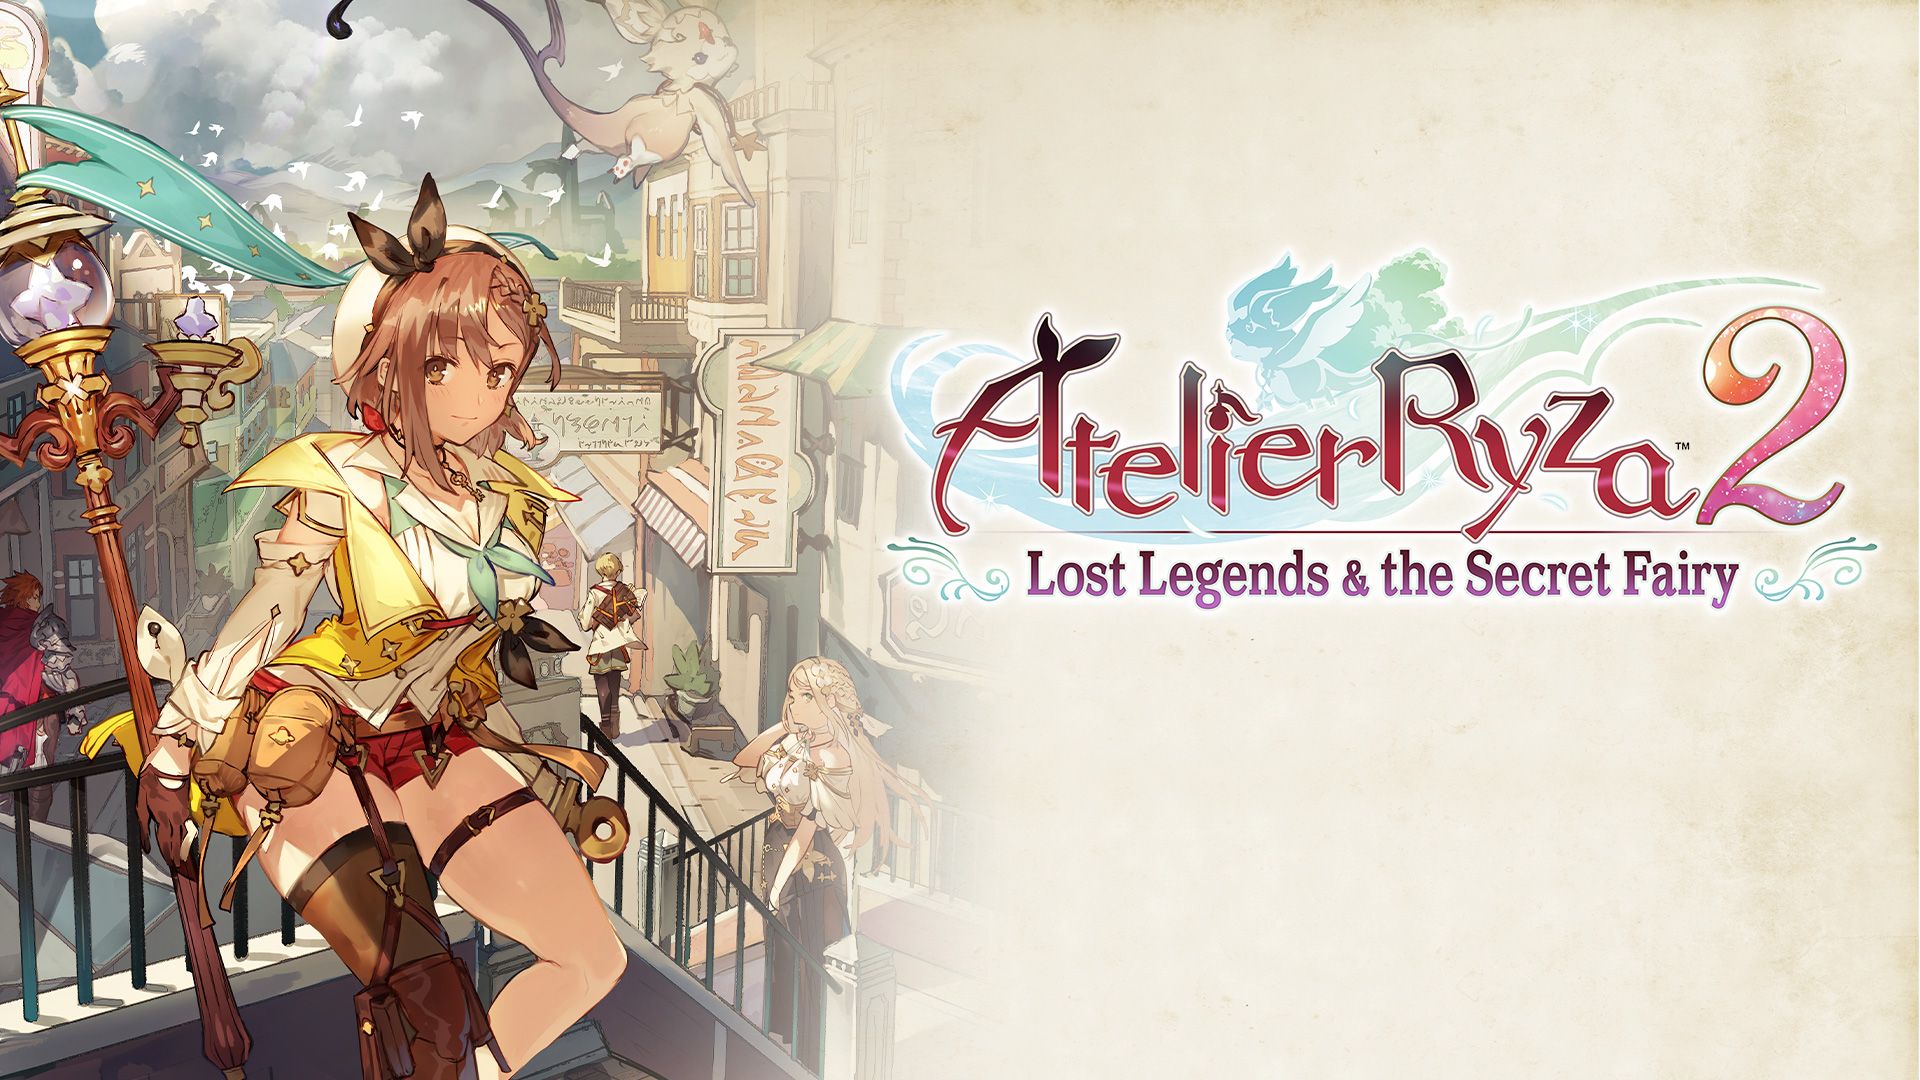 Atelier Ryza 2: Lost Legends & the Secret Fairy for Nintendo Switch Game Details